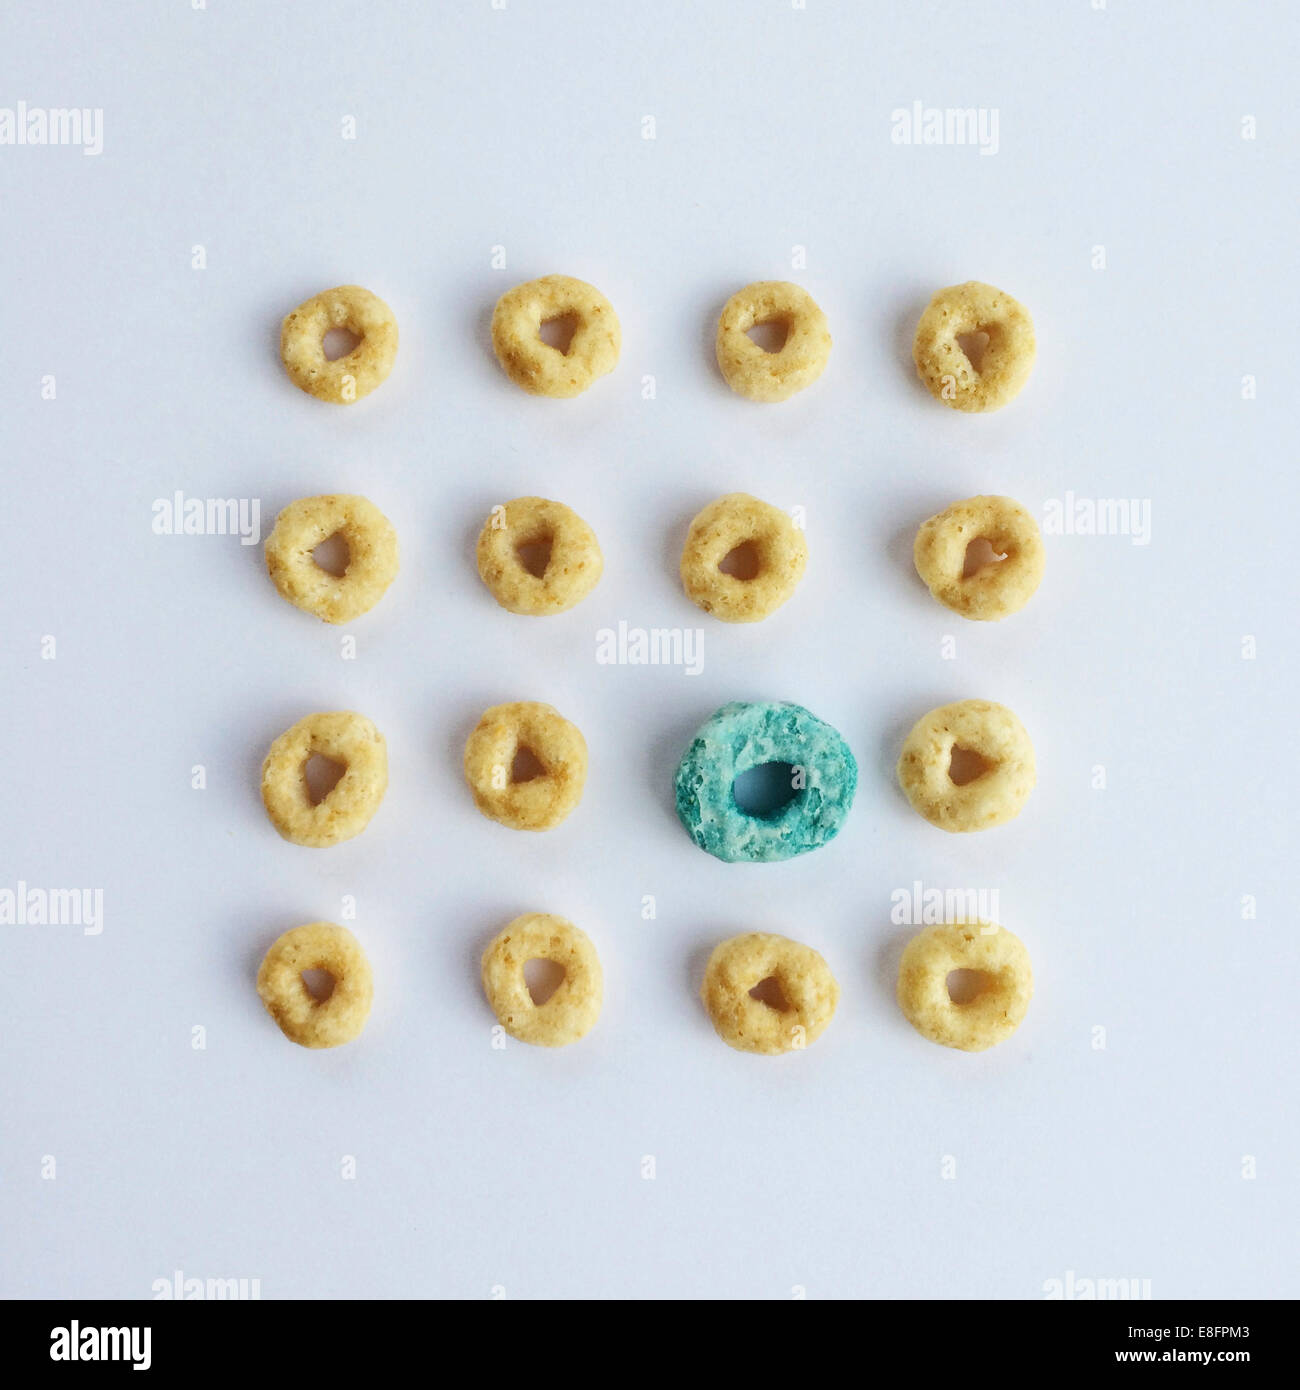 Close-up of circular breakfast cereal in a row Stock Photo